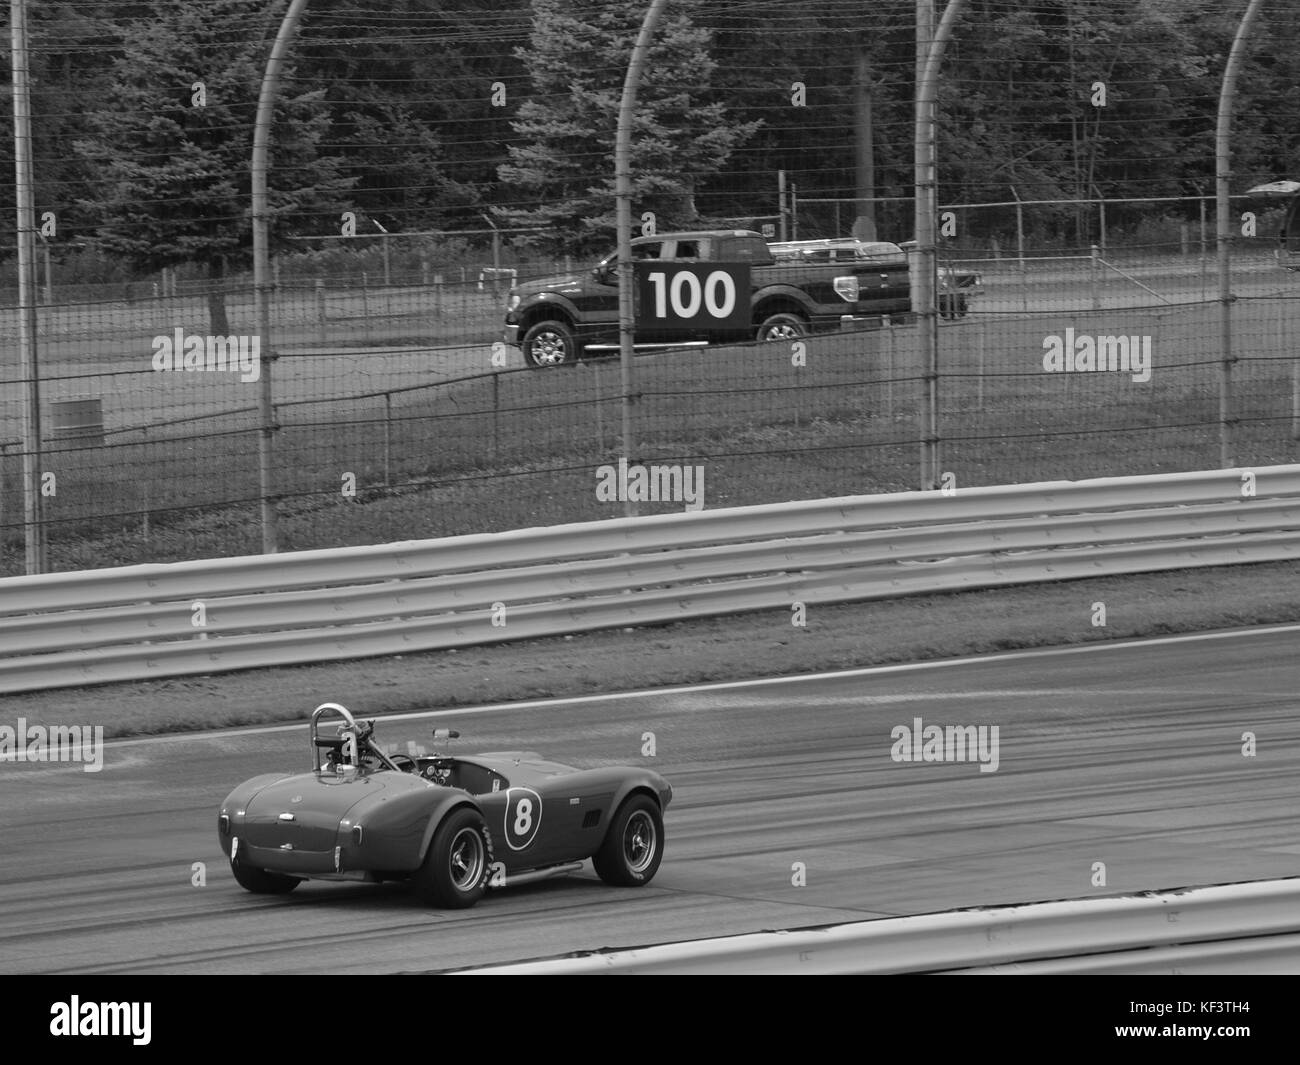 Mike Stotts' 1963 Shelby Cobra entering turn number 1 on the famed Watkins Glen race track near Seneca Lake in the Finger Lakes area of NY State' Stock Photo